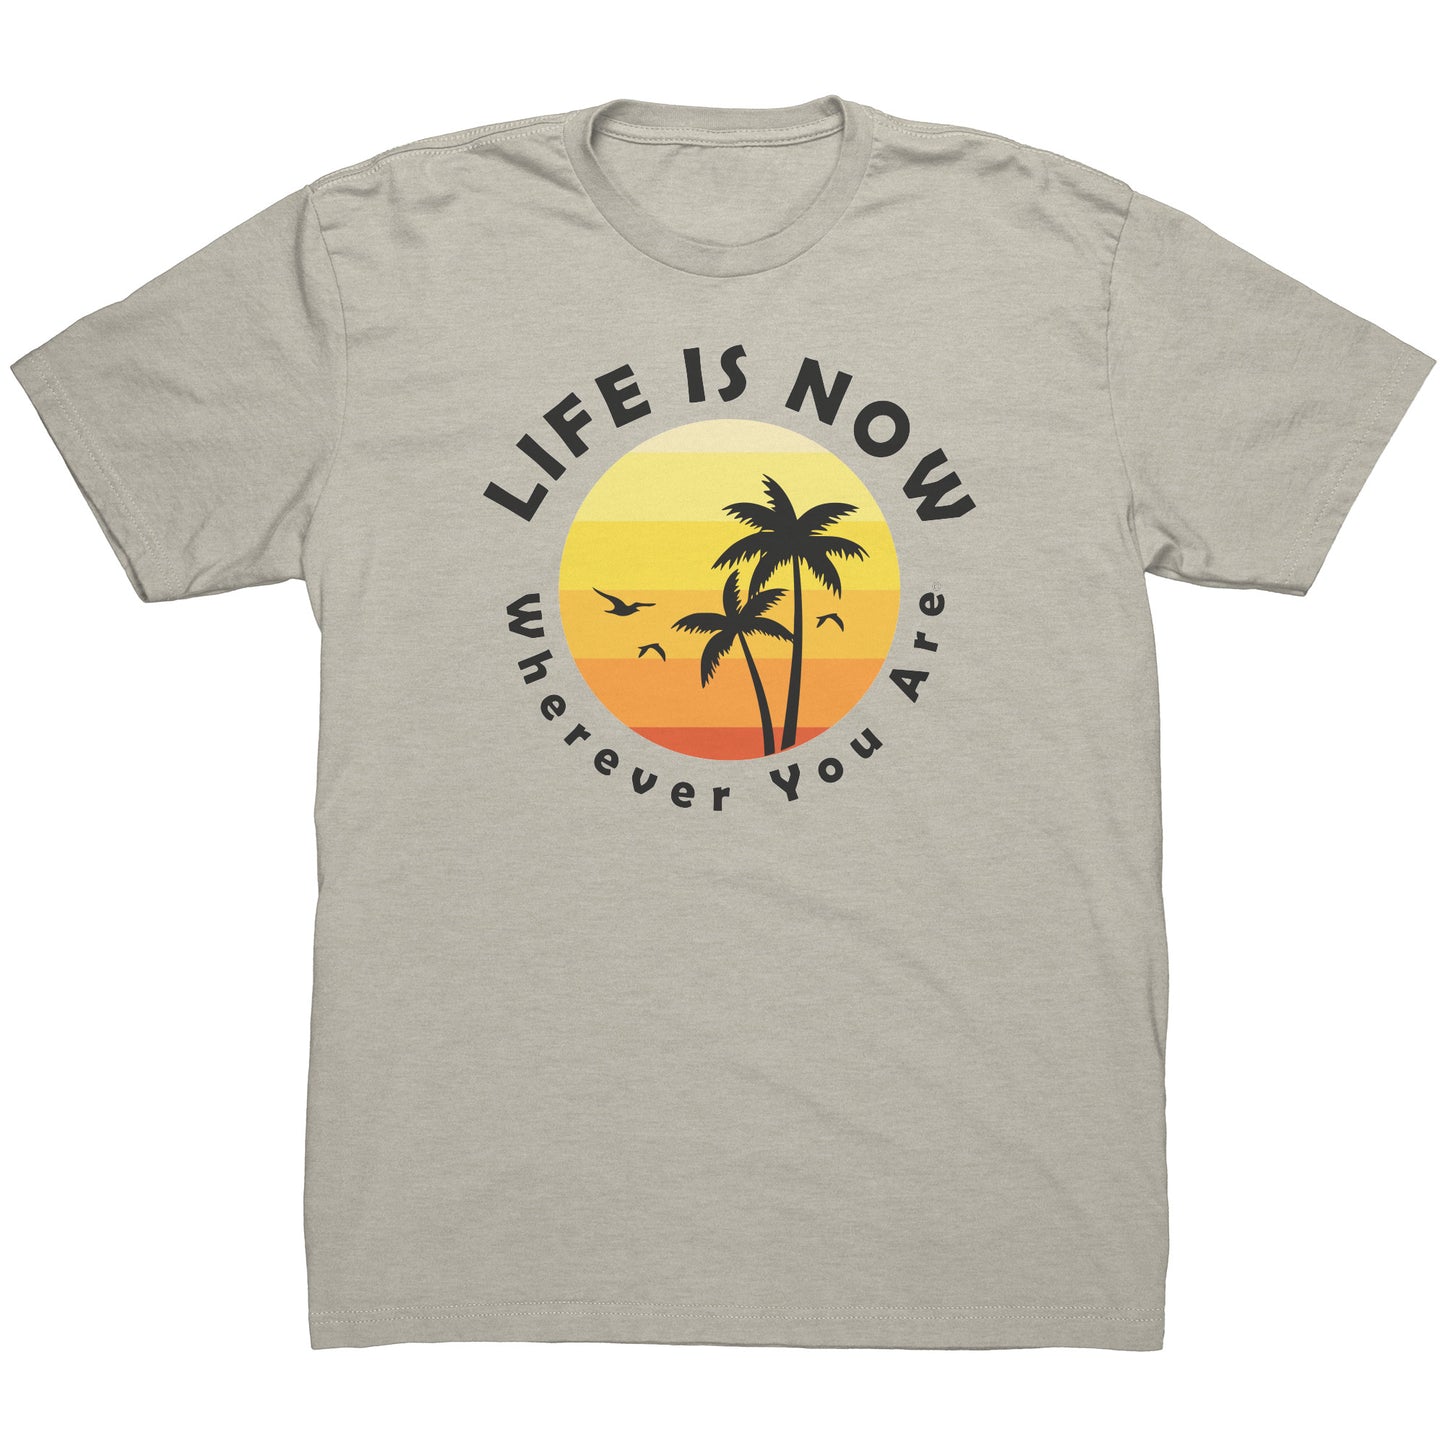 LiFE is NOW...Wherever You Are Palms Short Sleeve T-shirt (men’s)